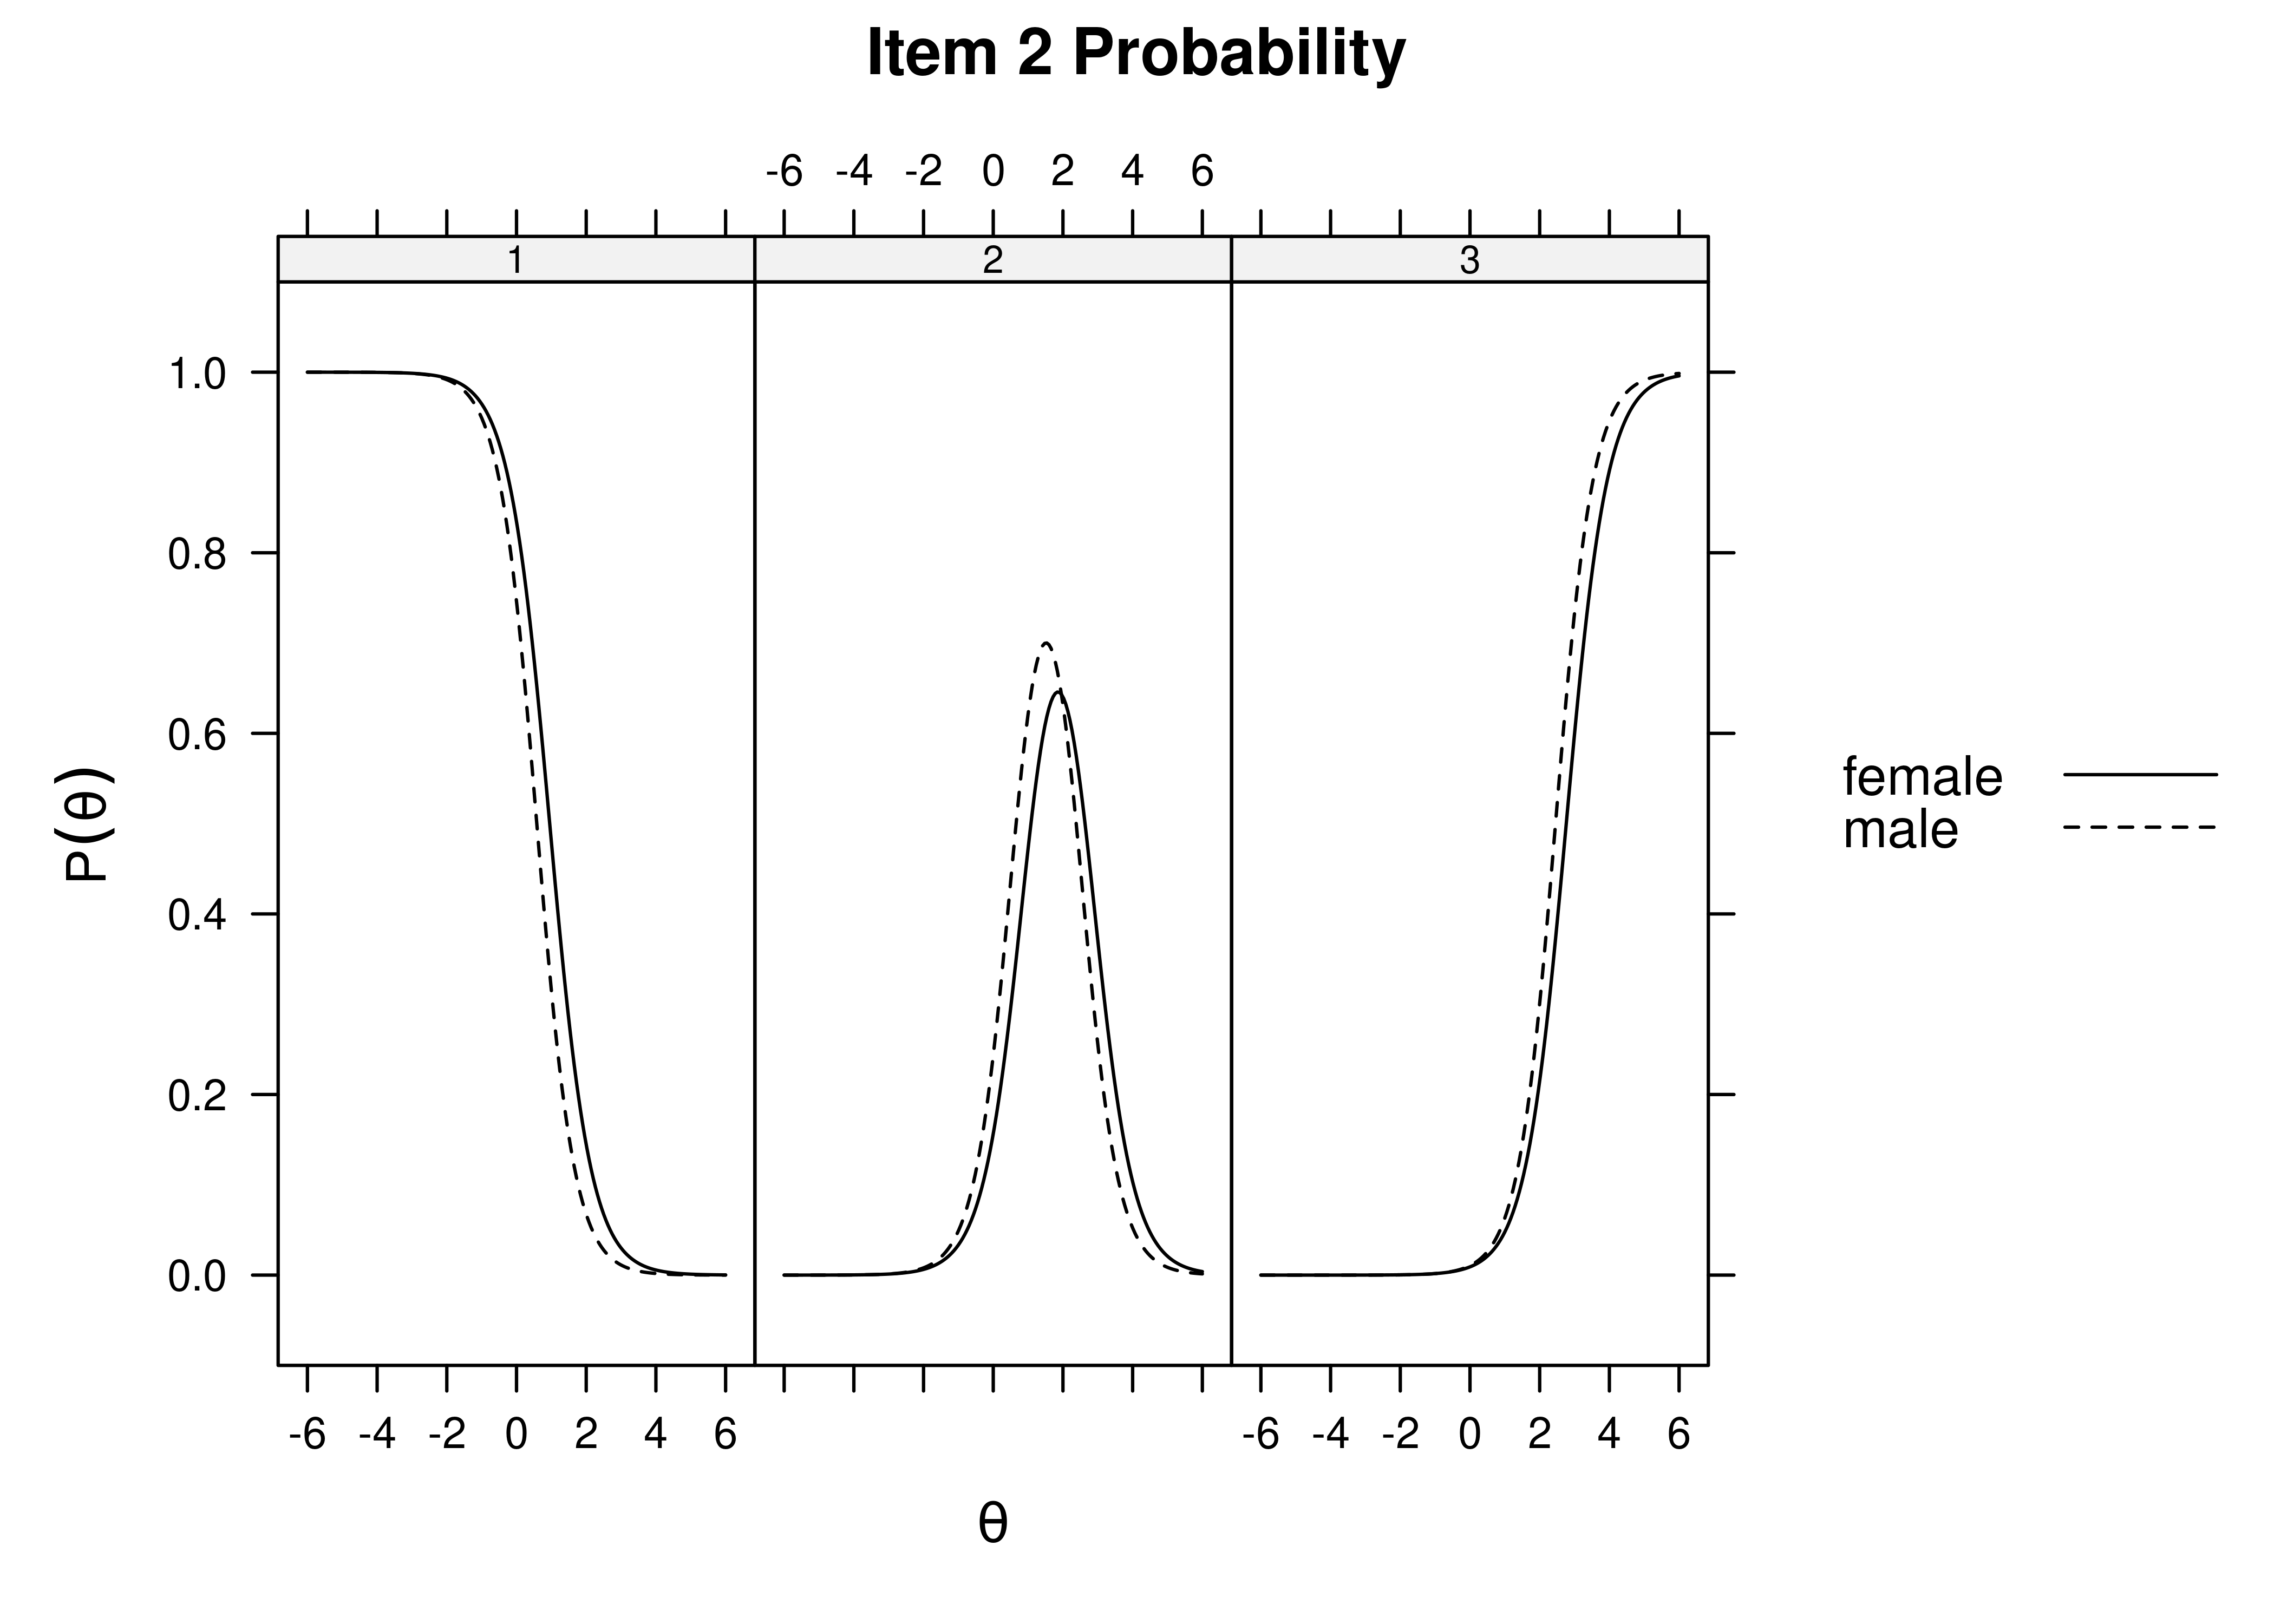 Item Response Category Characteristic Curves by Sex: Item 2.